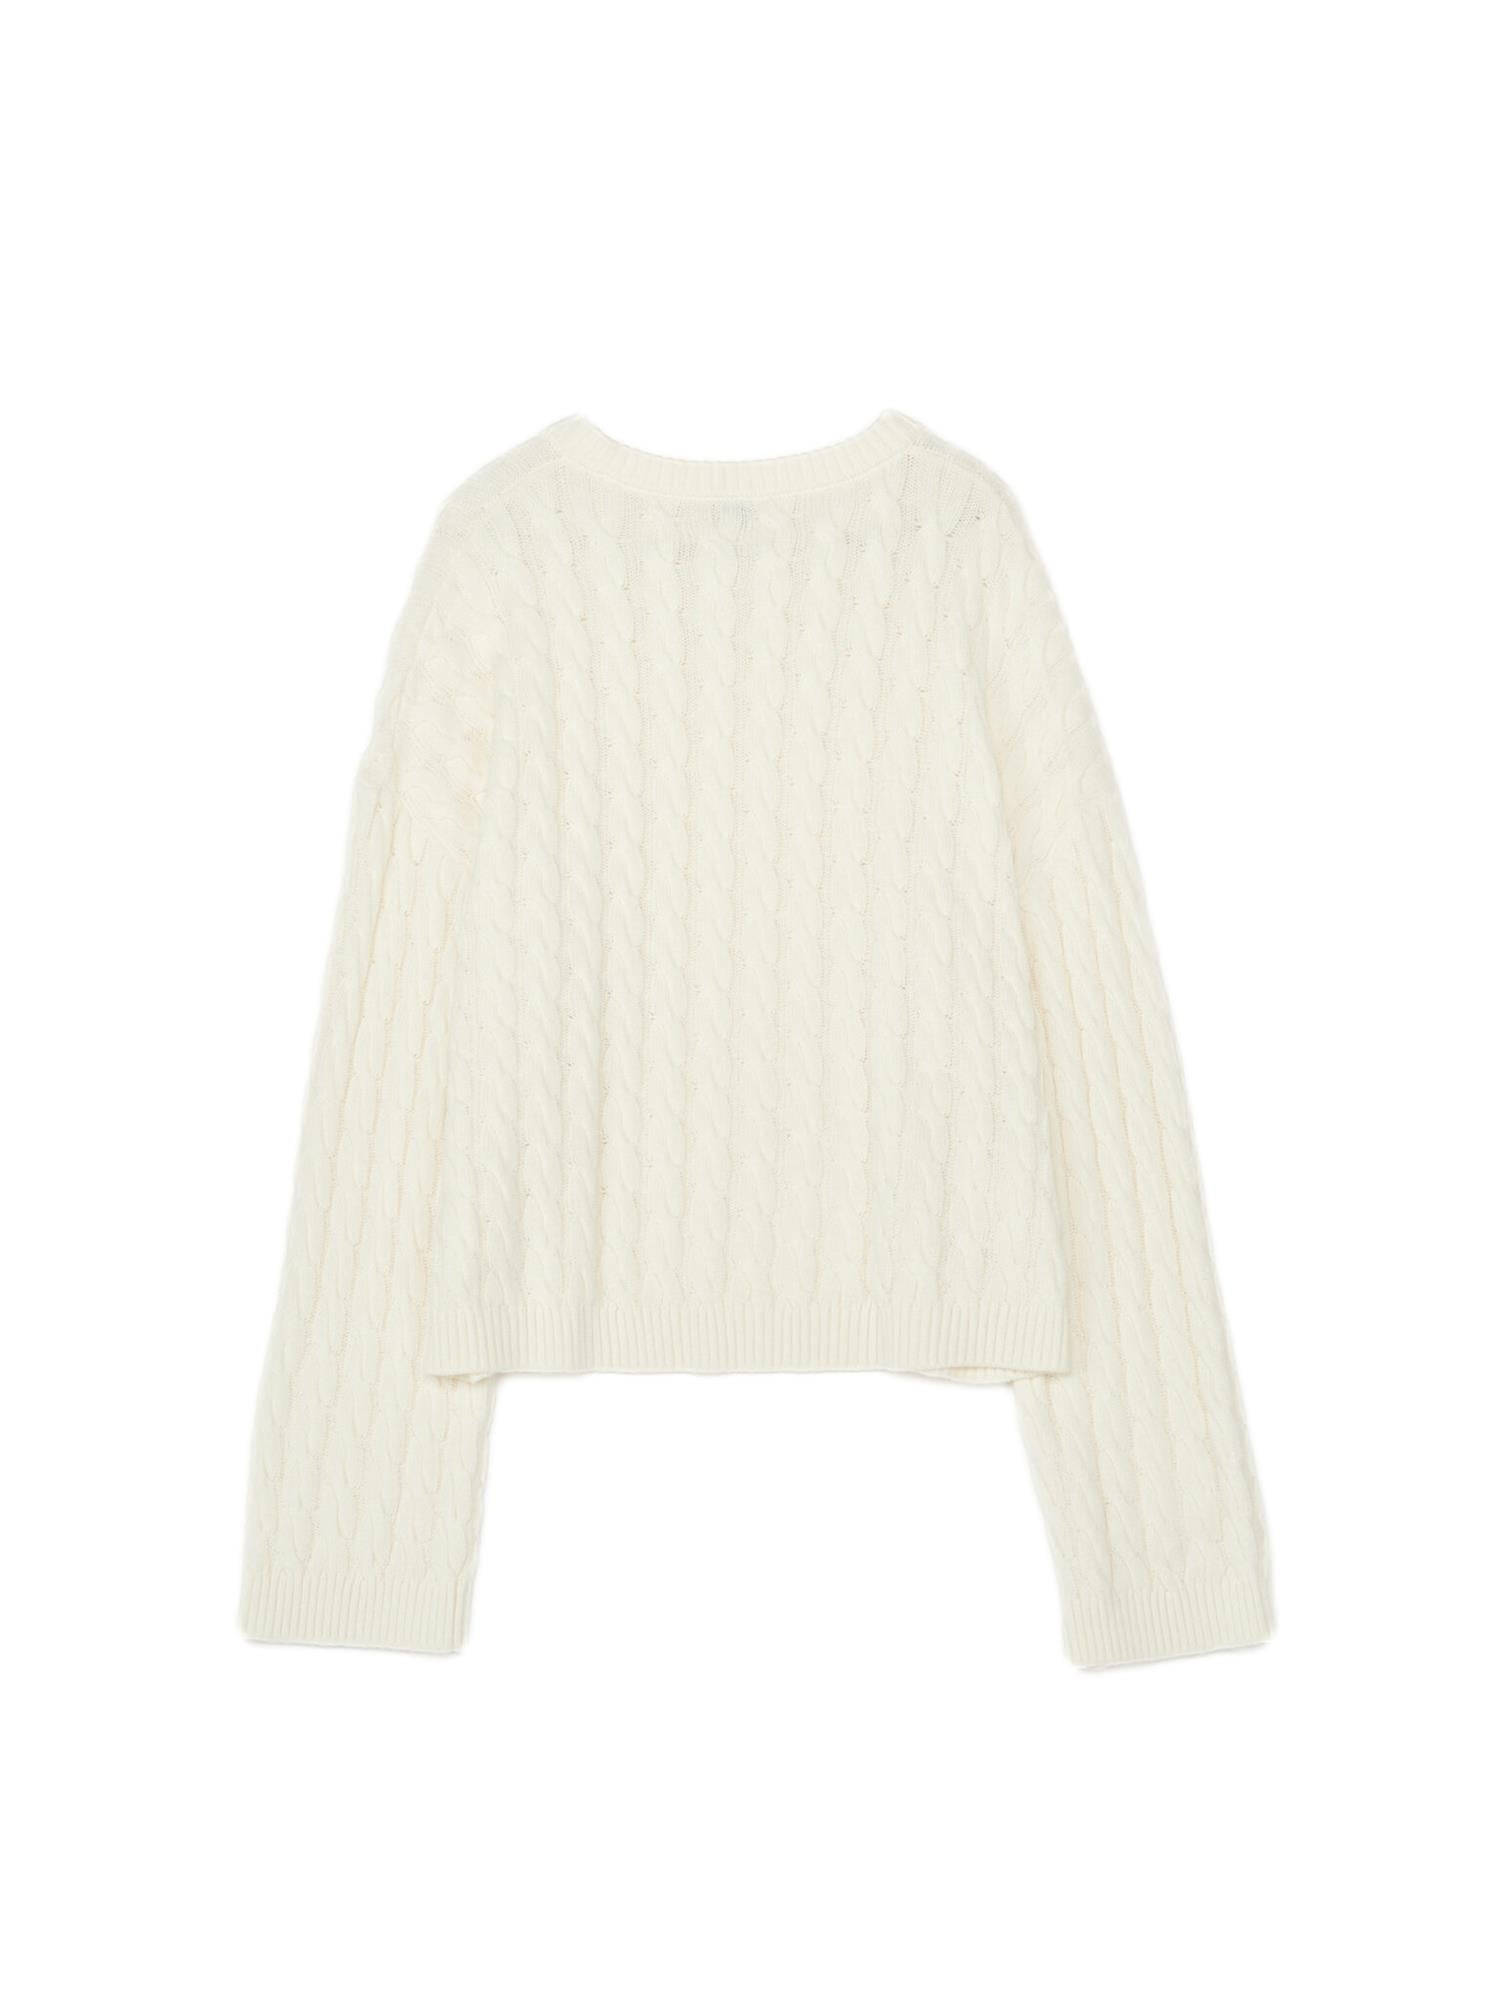 Julie Josephine Cable Knit Sweater Genser Off-White - [shop.name]